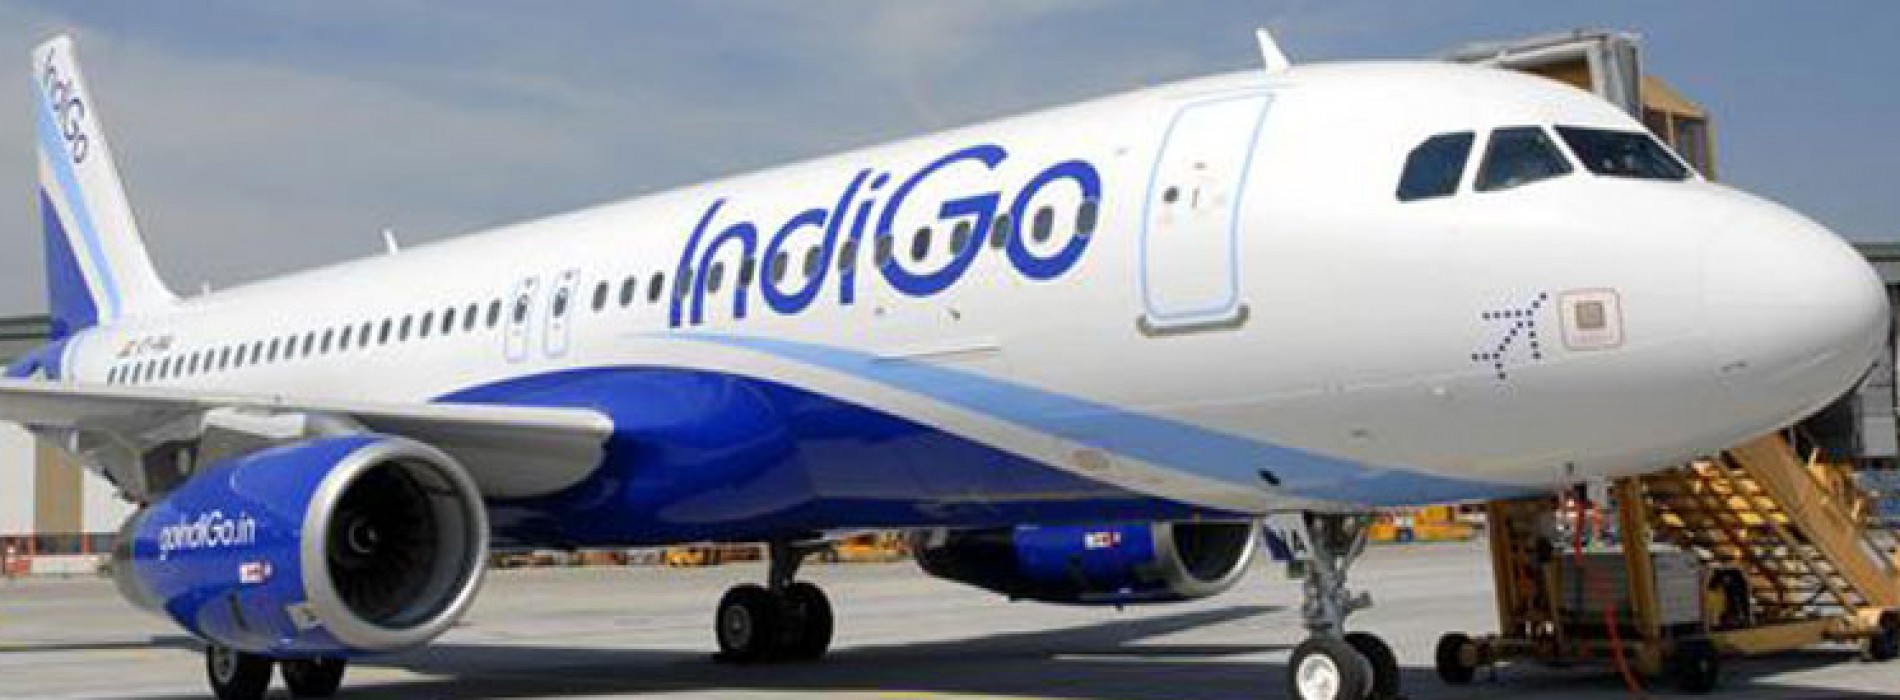 Galloping IndiGo Stock Outpaces Combined m-cap of Jet, SpiceJet